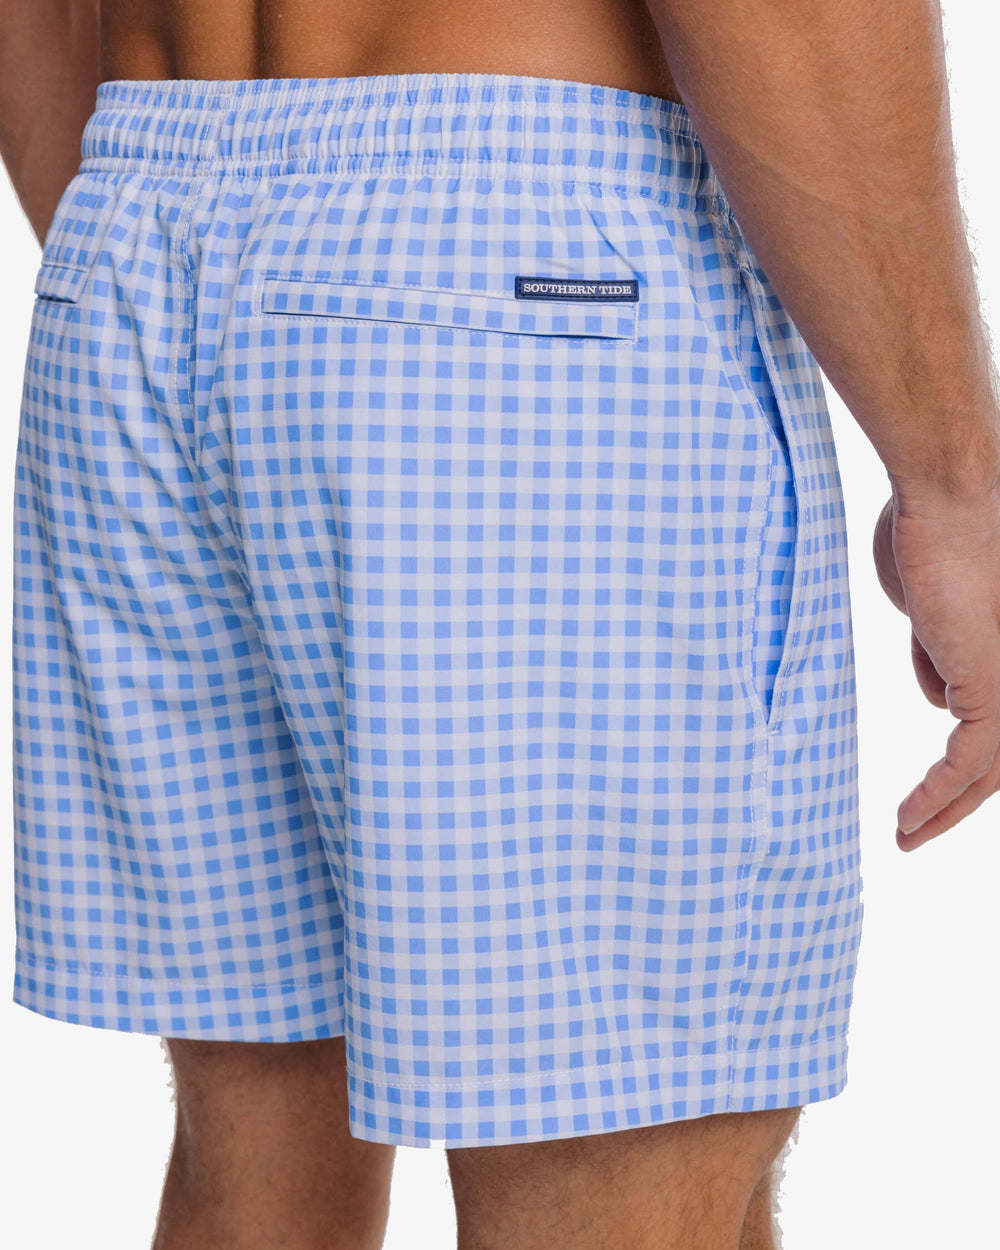 The detail view of the Southern Tide Baldwin Gingham Printed Swim Trunk by Southern Tide - Ocean Channel